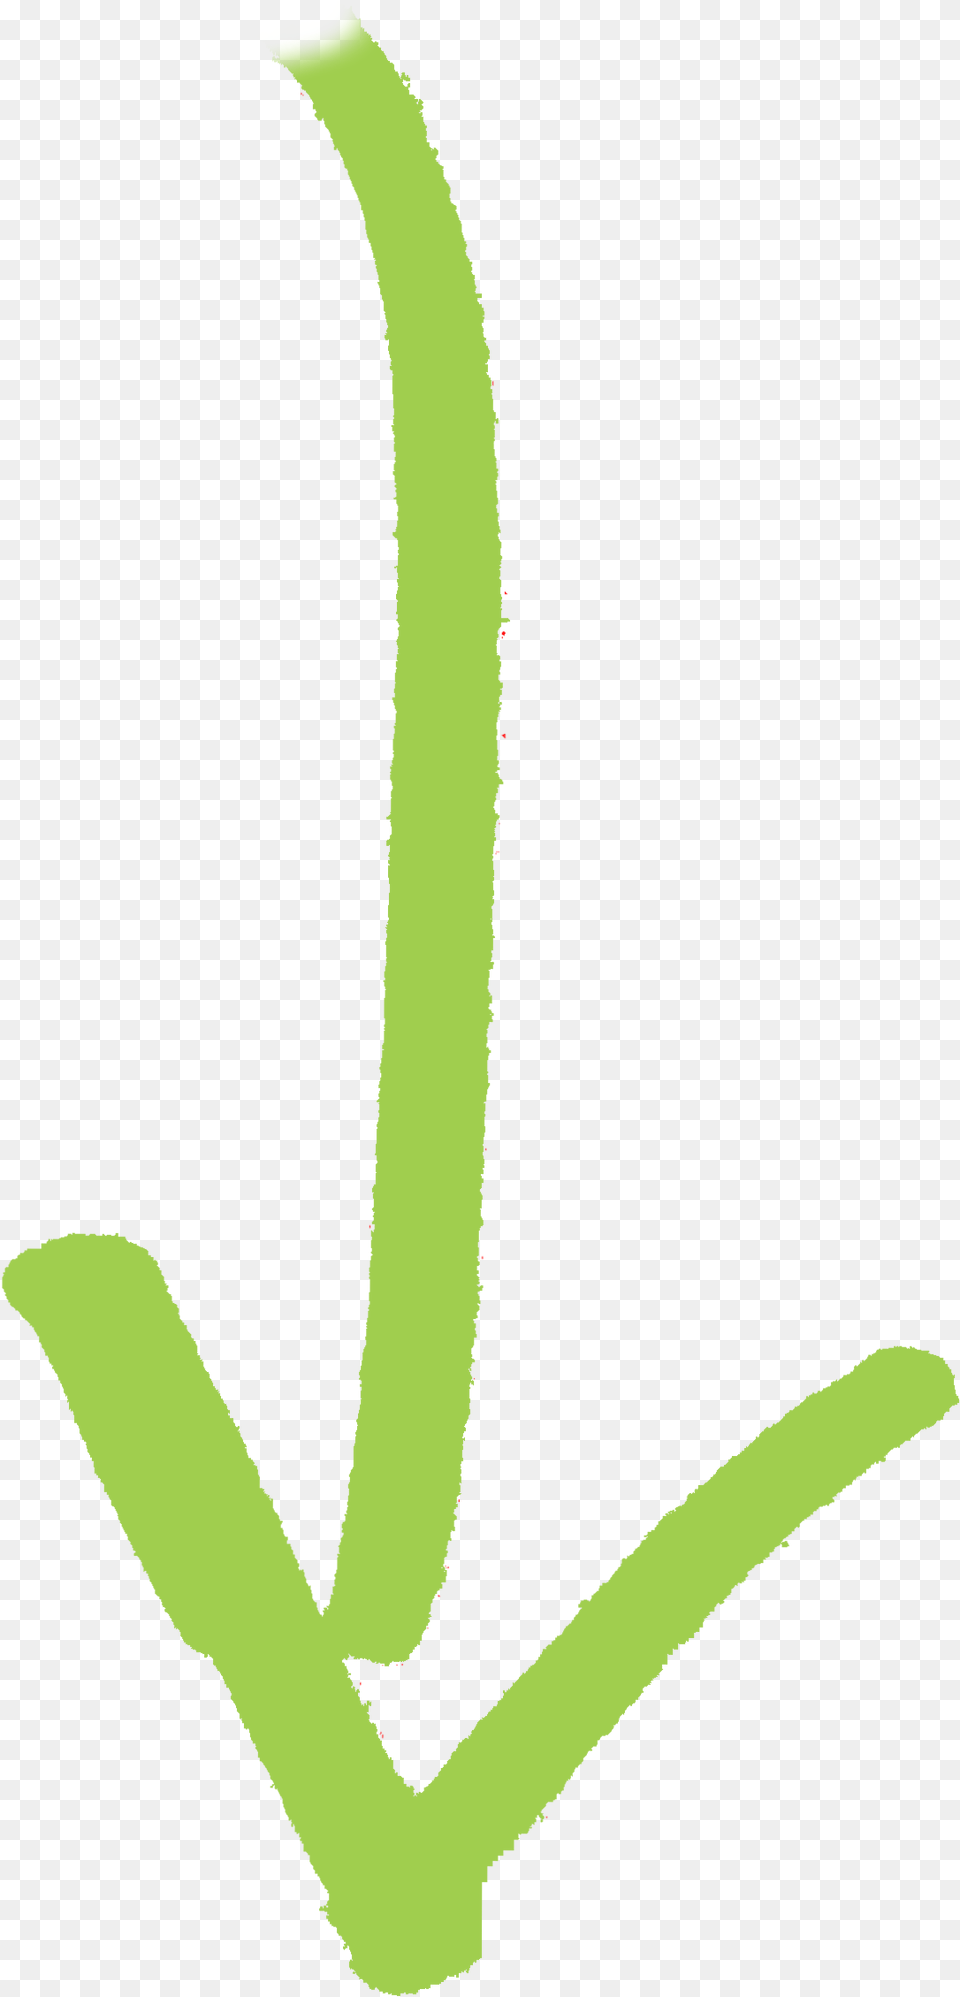 Curved Arrow Up Green Green Drawn Arrow Transparent Green Curved Arrow Drawn, Flower, Plant, Person, Bean Free Png Download